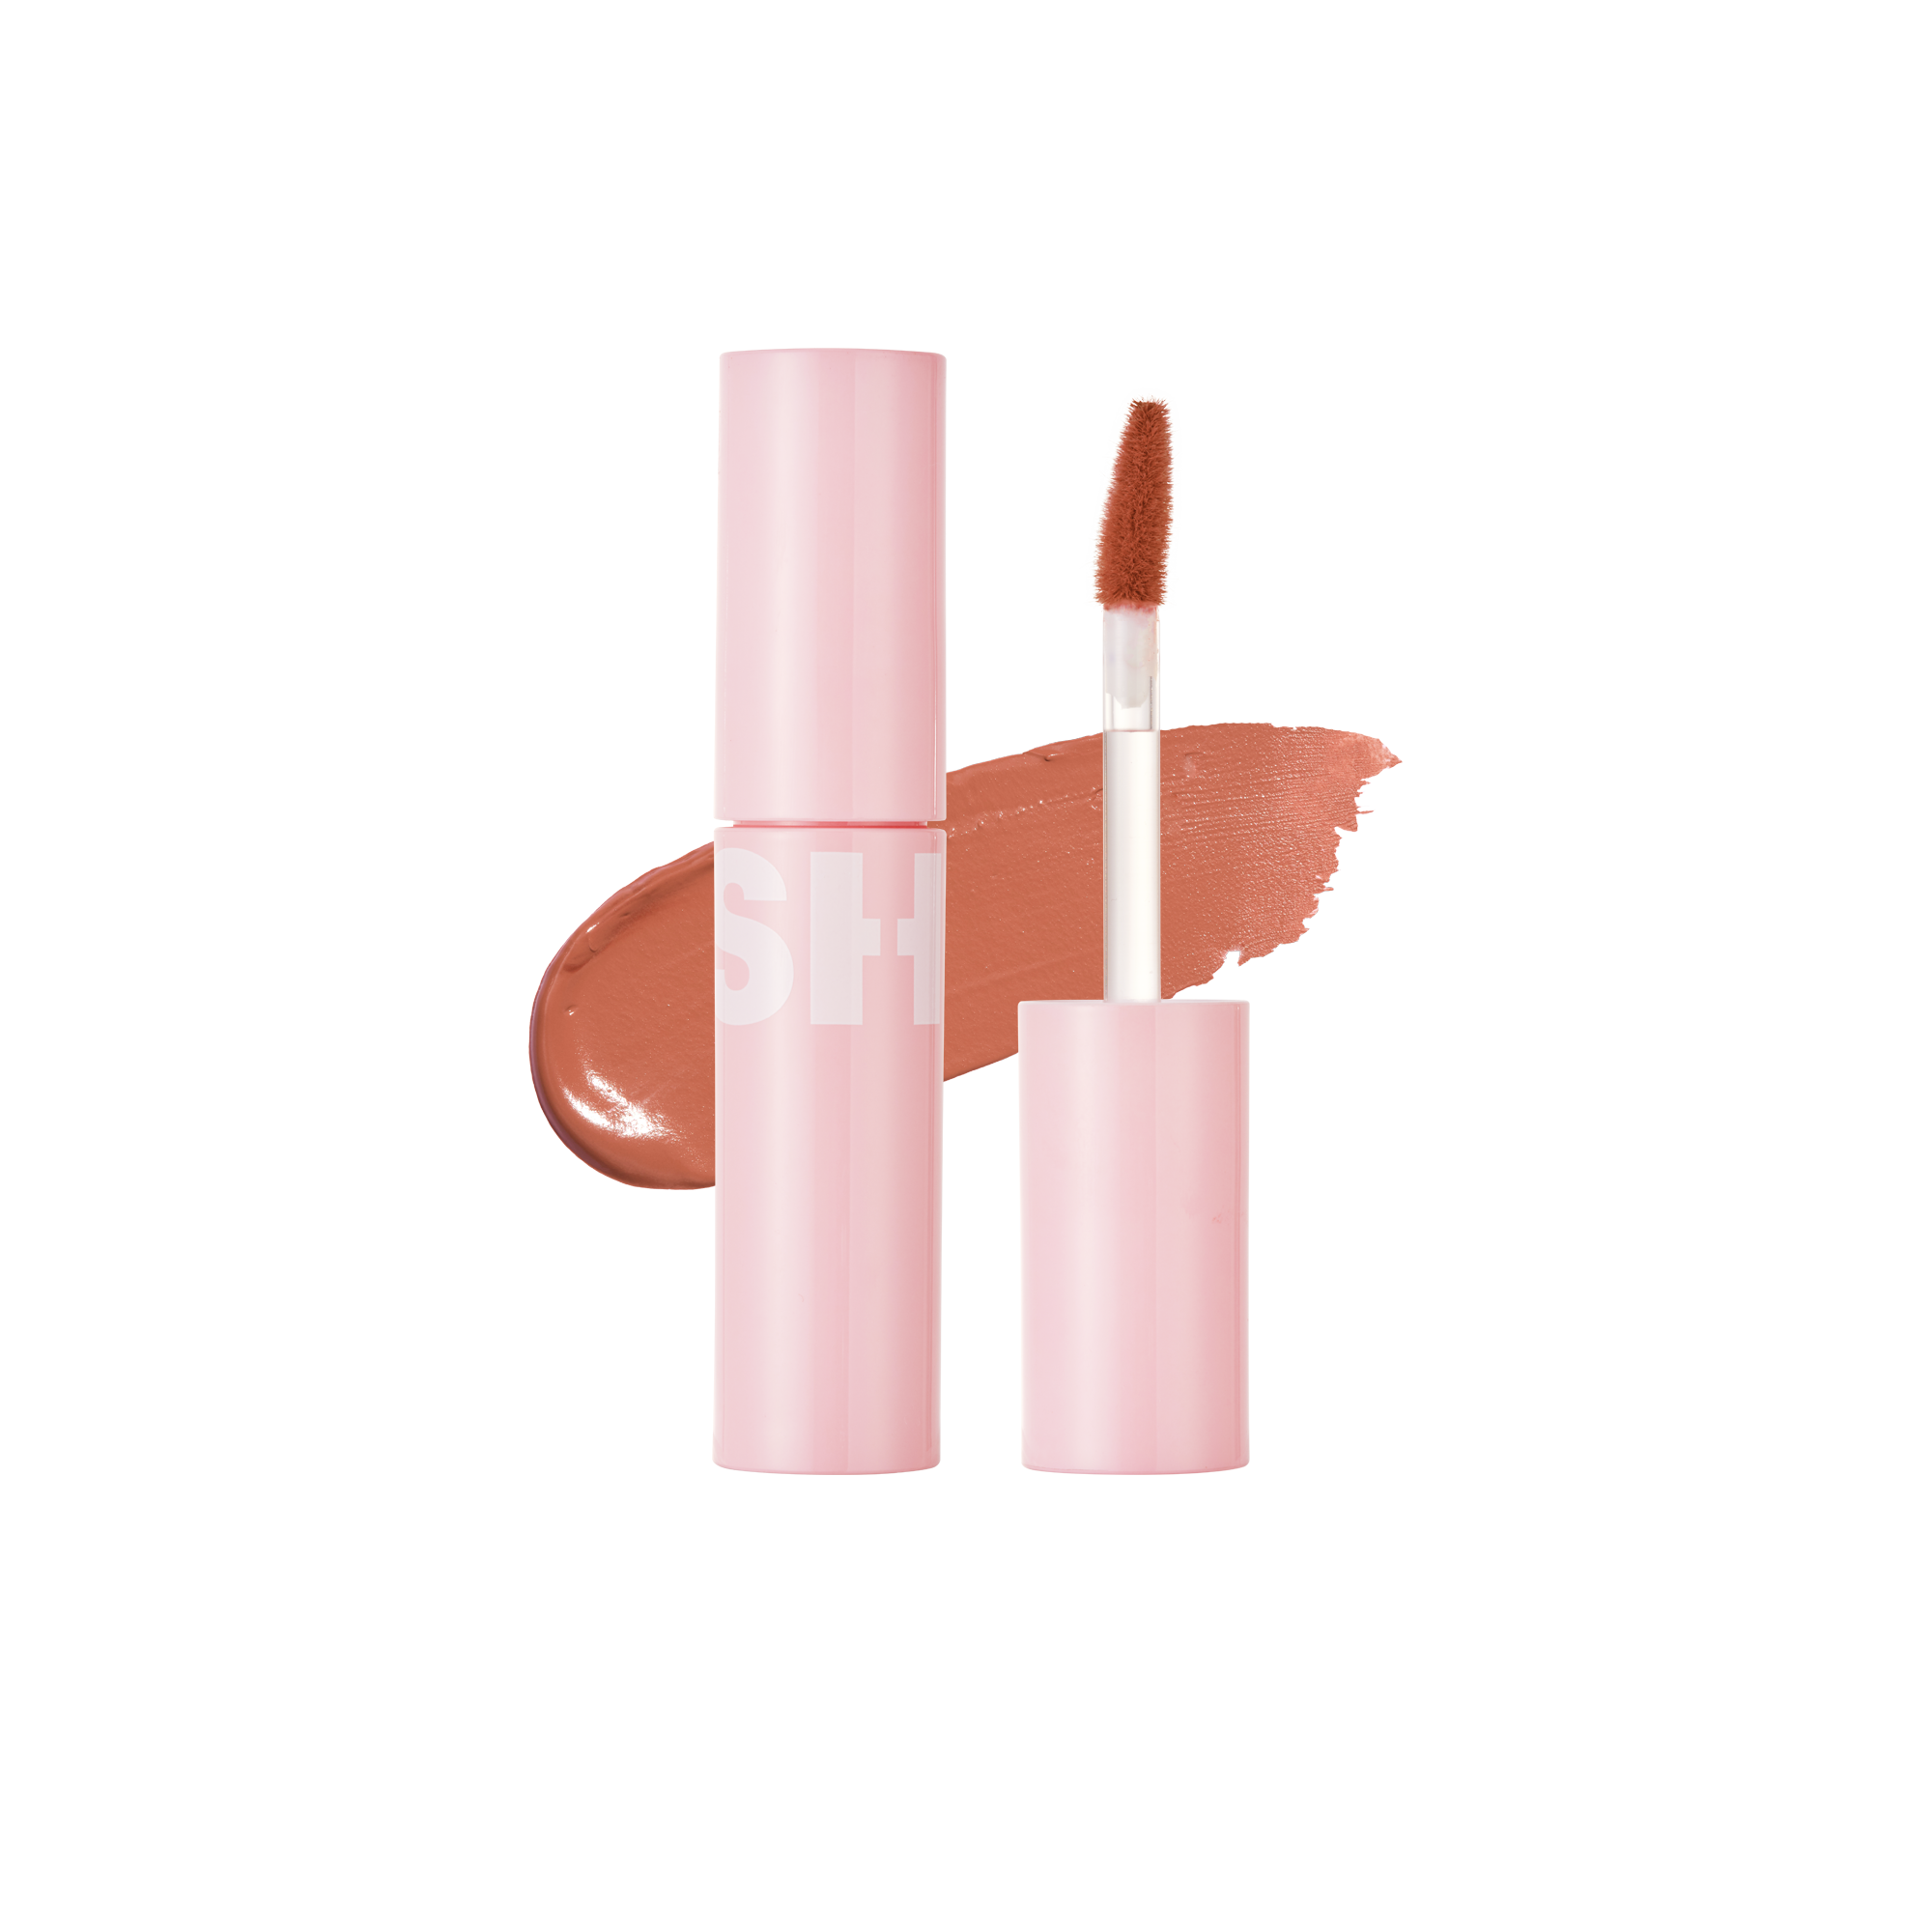 Fluffy Lip Tint | The Blessed Moon – 01 – Cheeze my-k.ro/ imagine noua